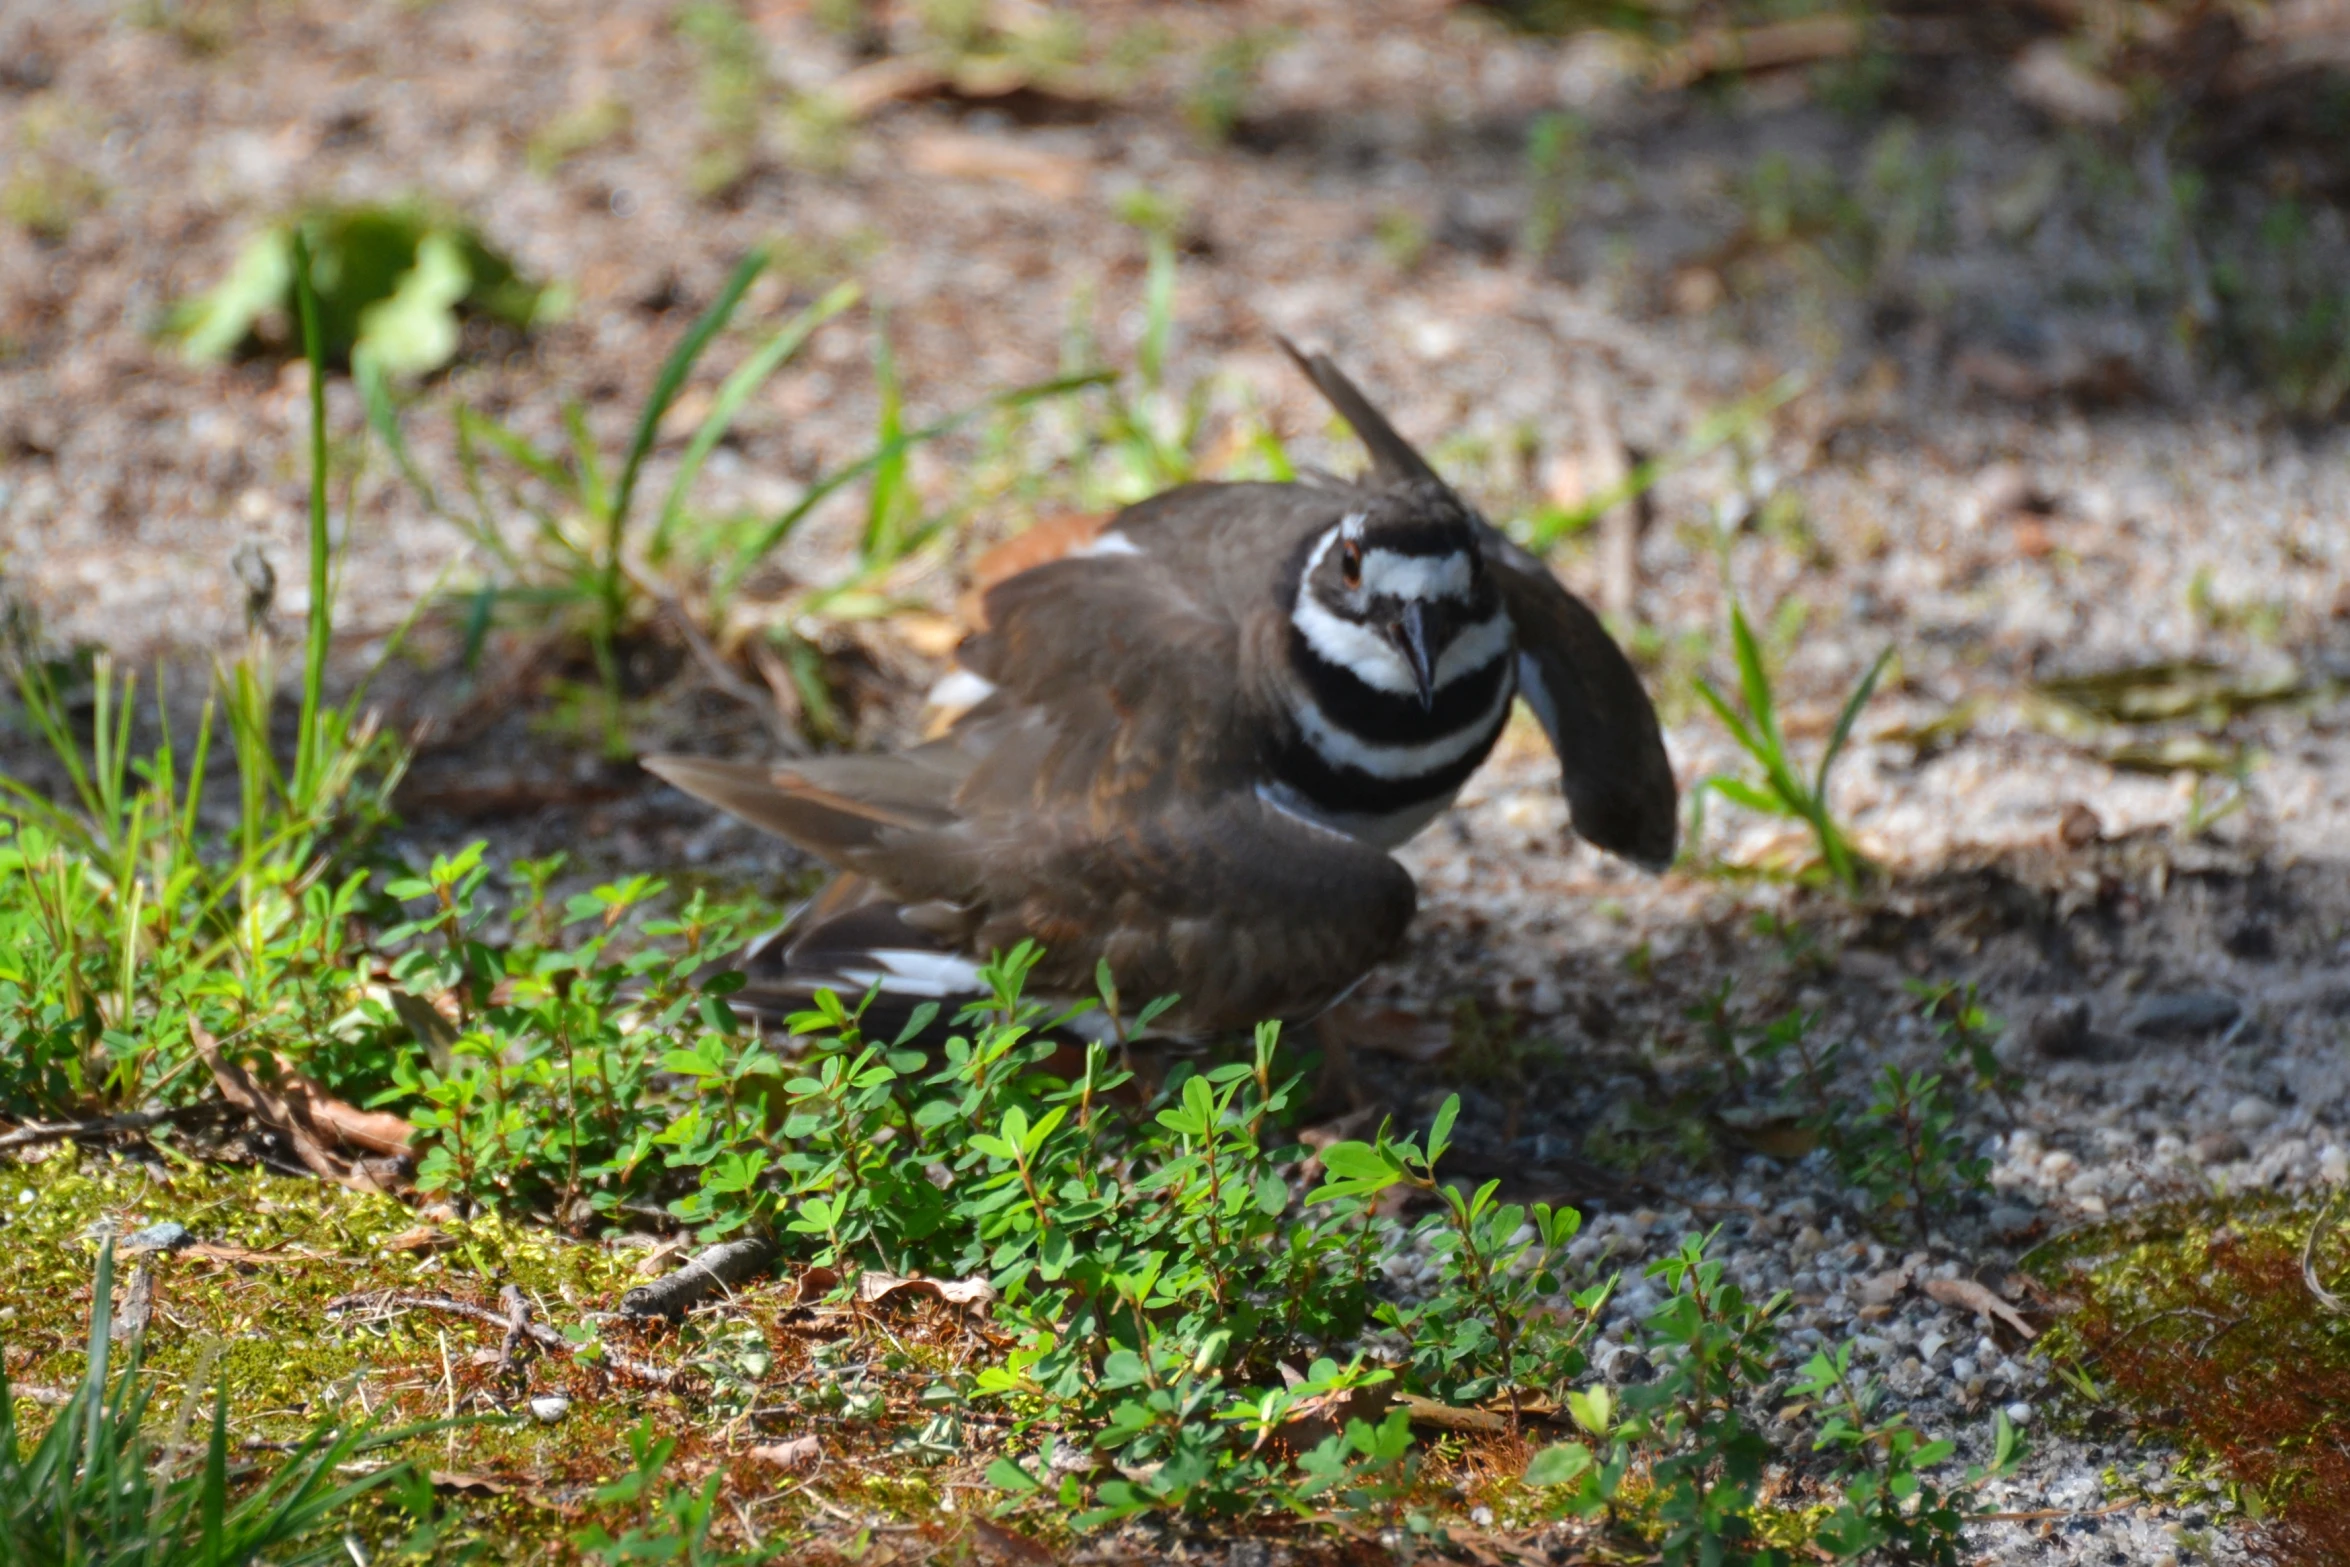 a small bird is resting in a patch of grass